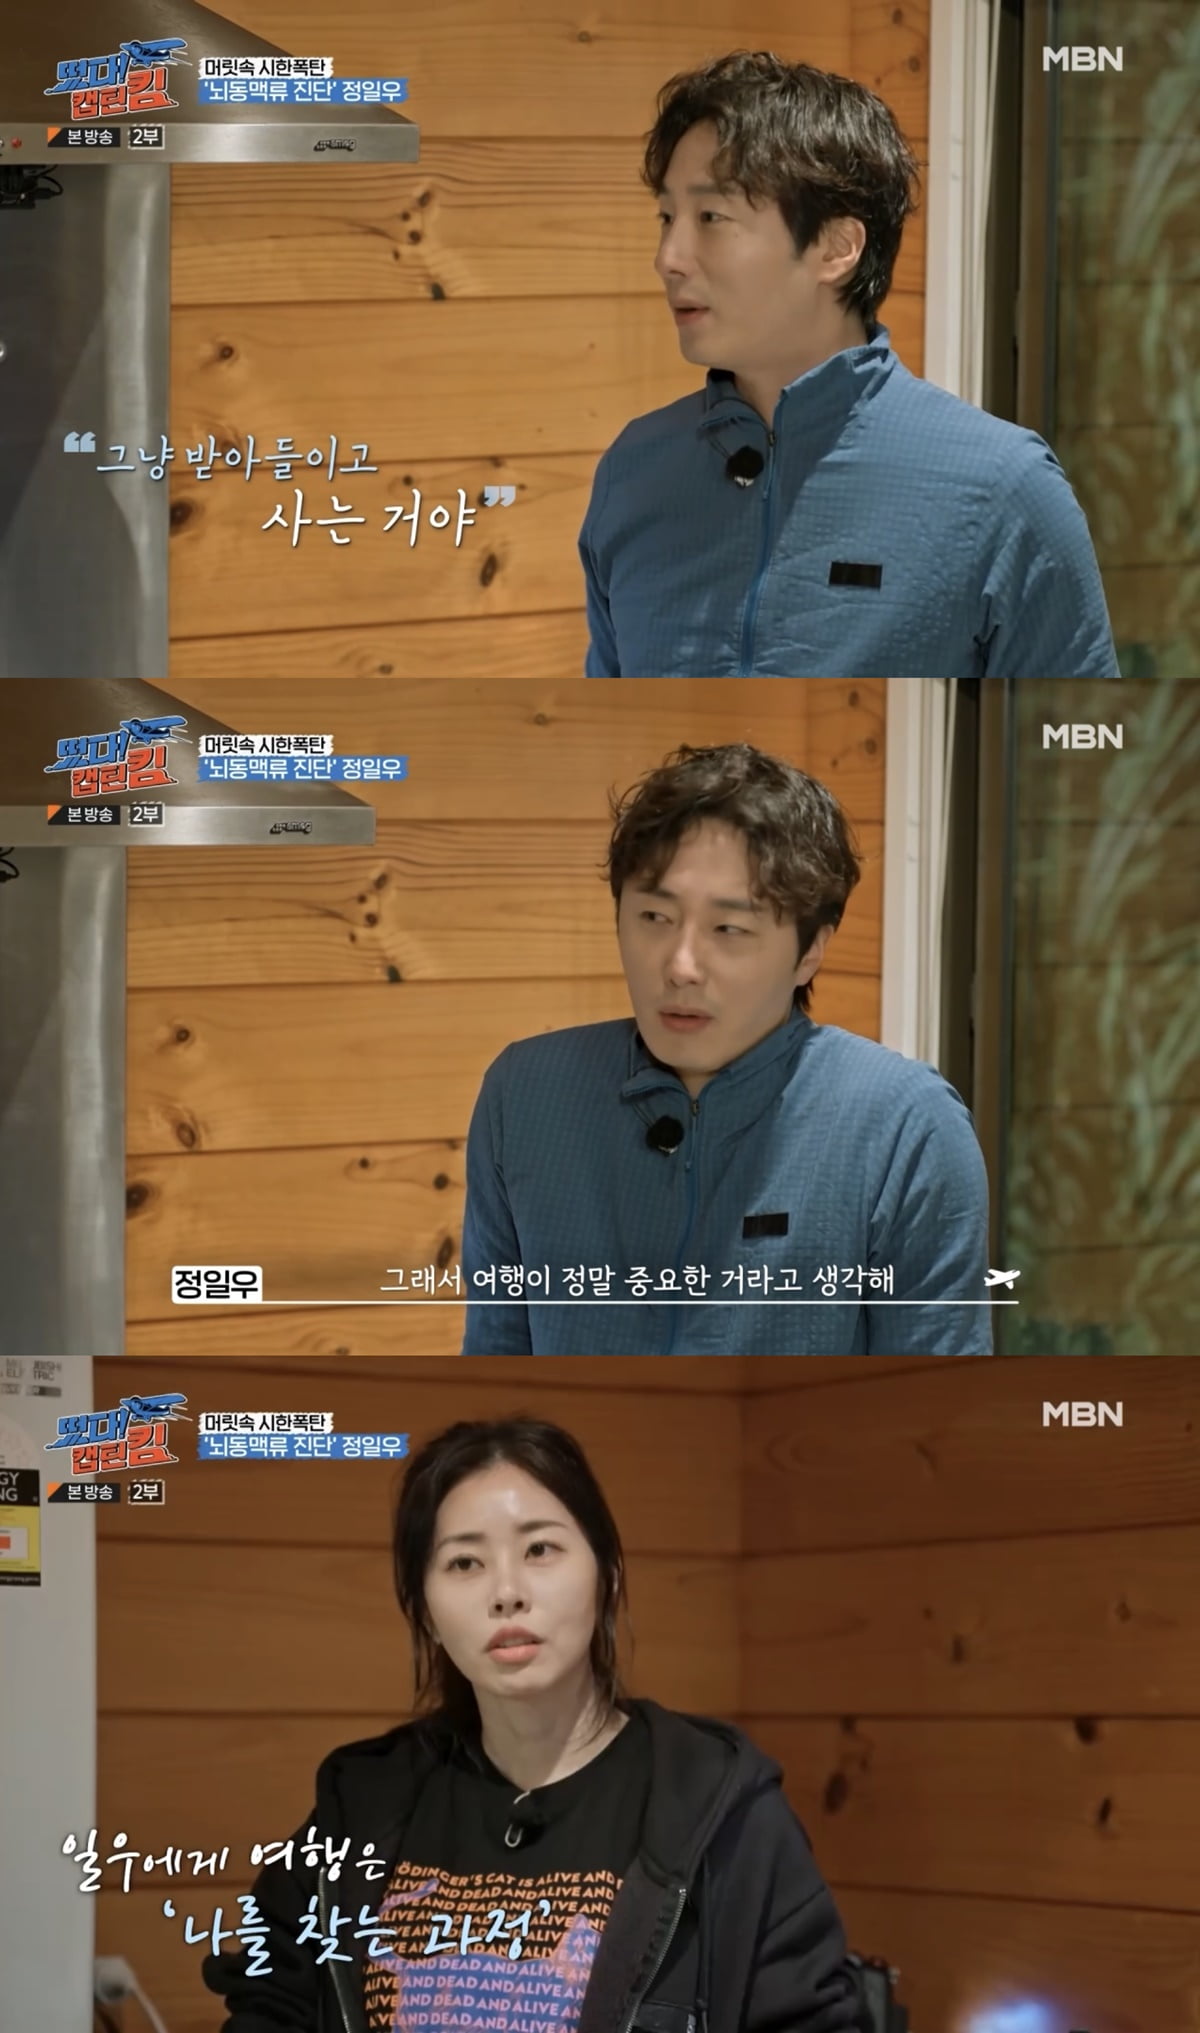 Jung Il-woo "I accept the shock of a cerebral aneurysm and live with it"